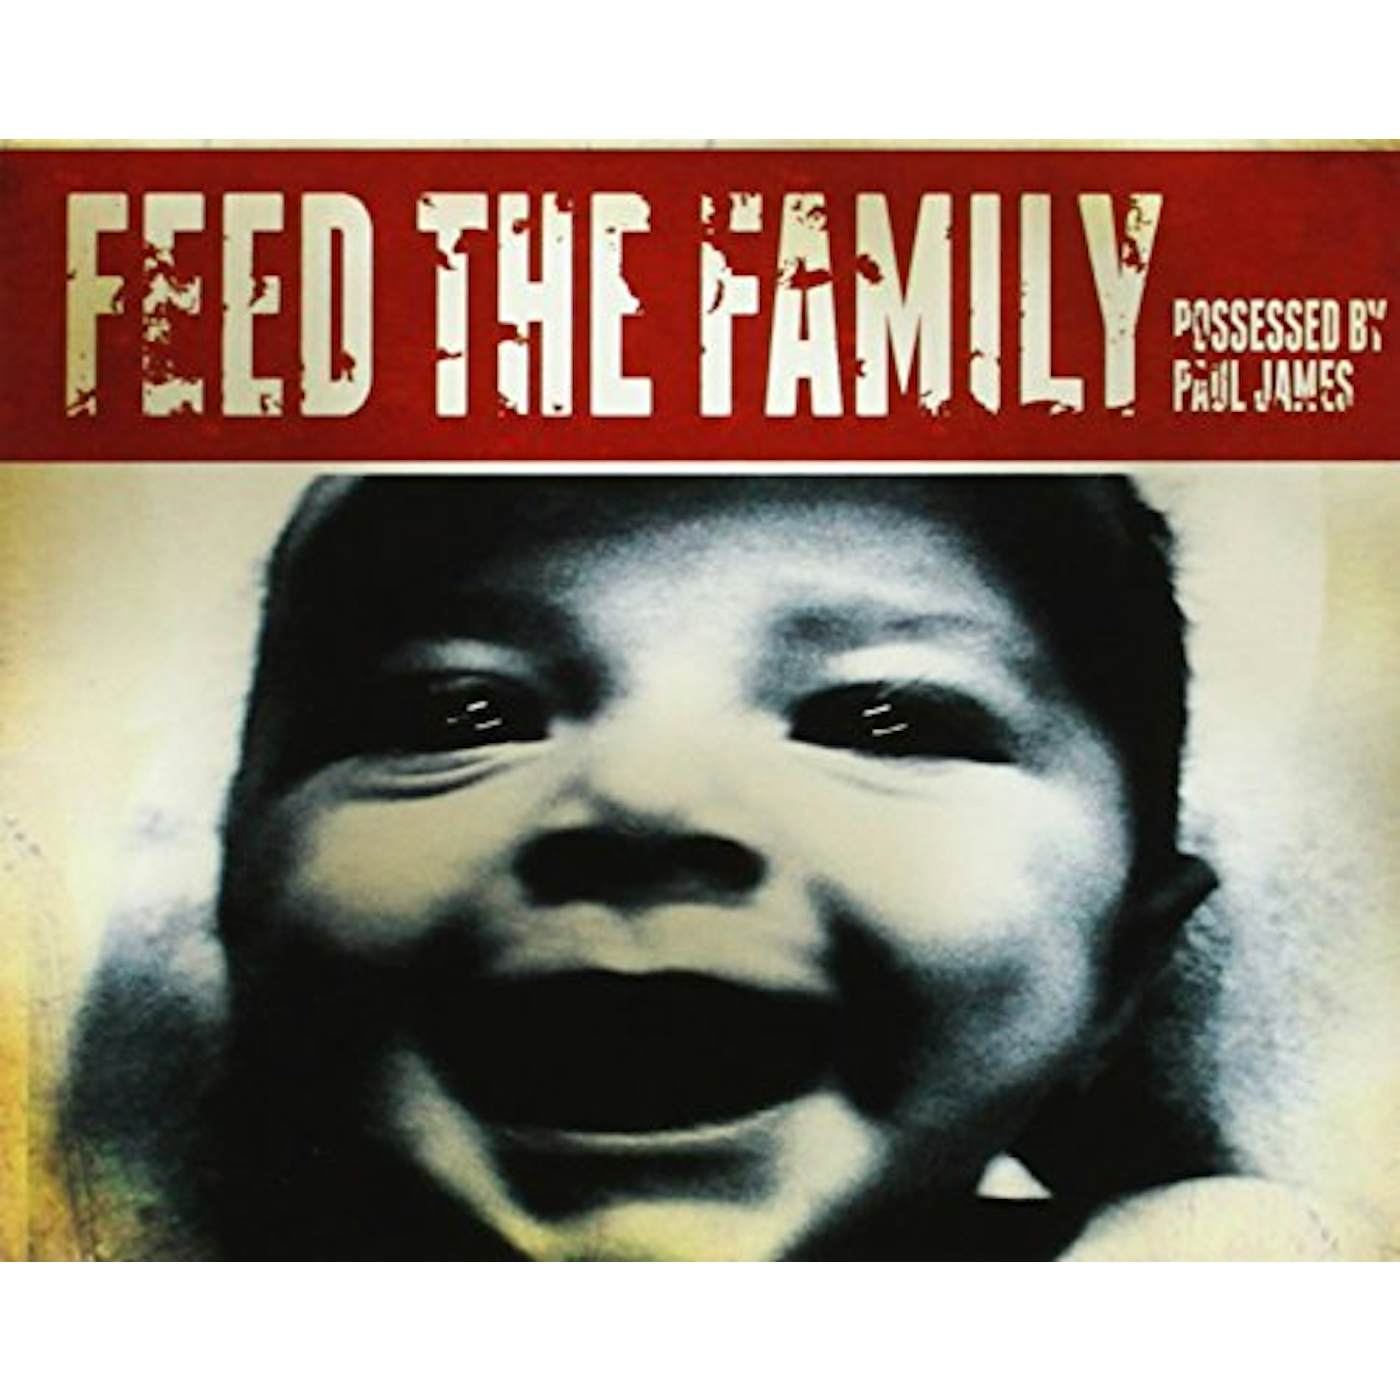 Possessed by Paul James FEED THE FAMILY CD